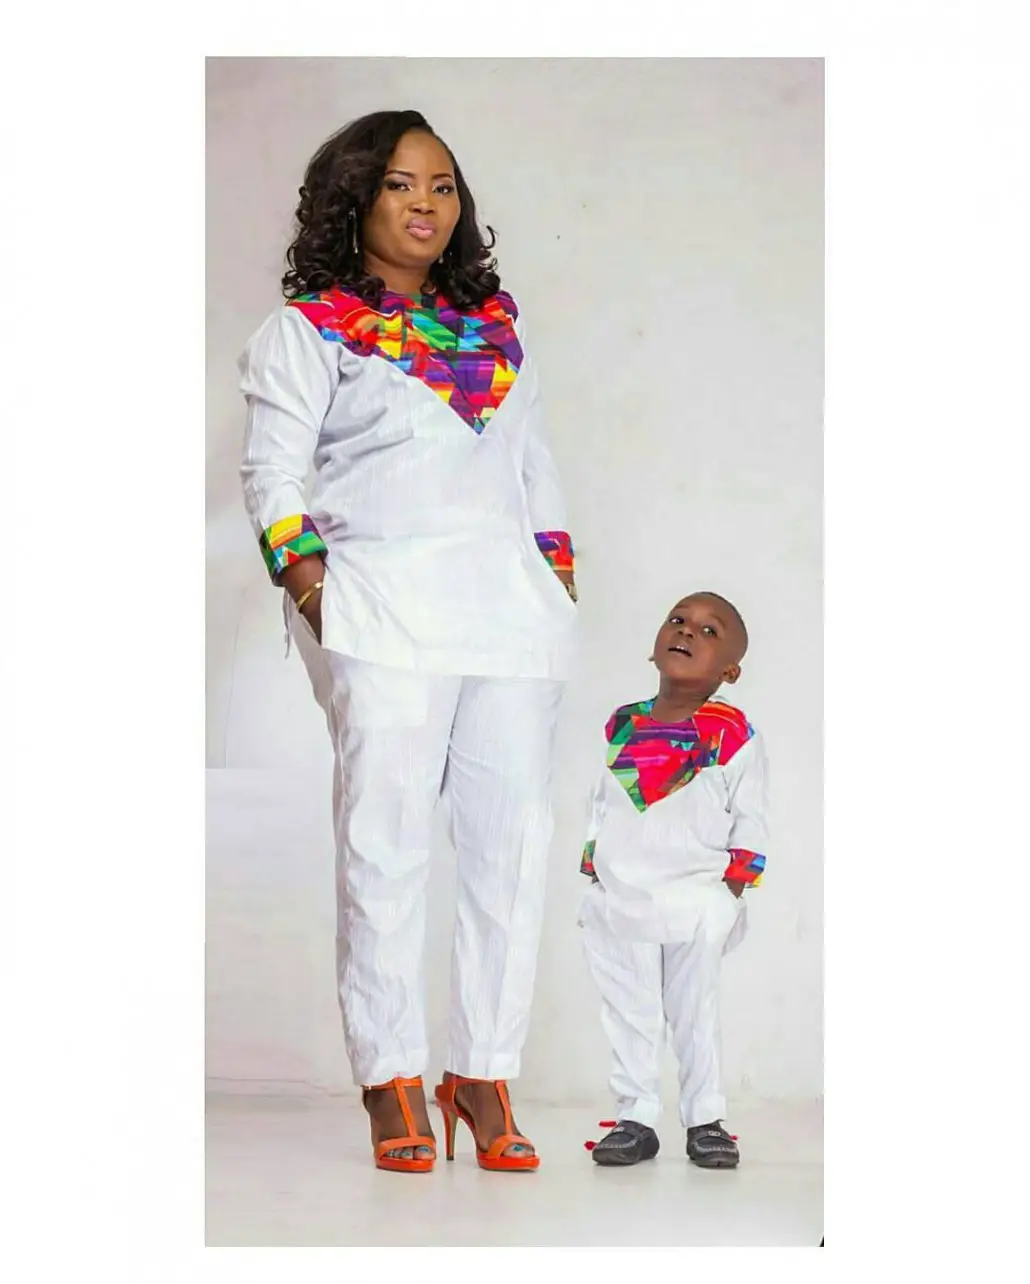 Stylish Mother And Daugther/Son Outfits amillionstyles.com @flintheartng